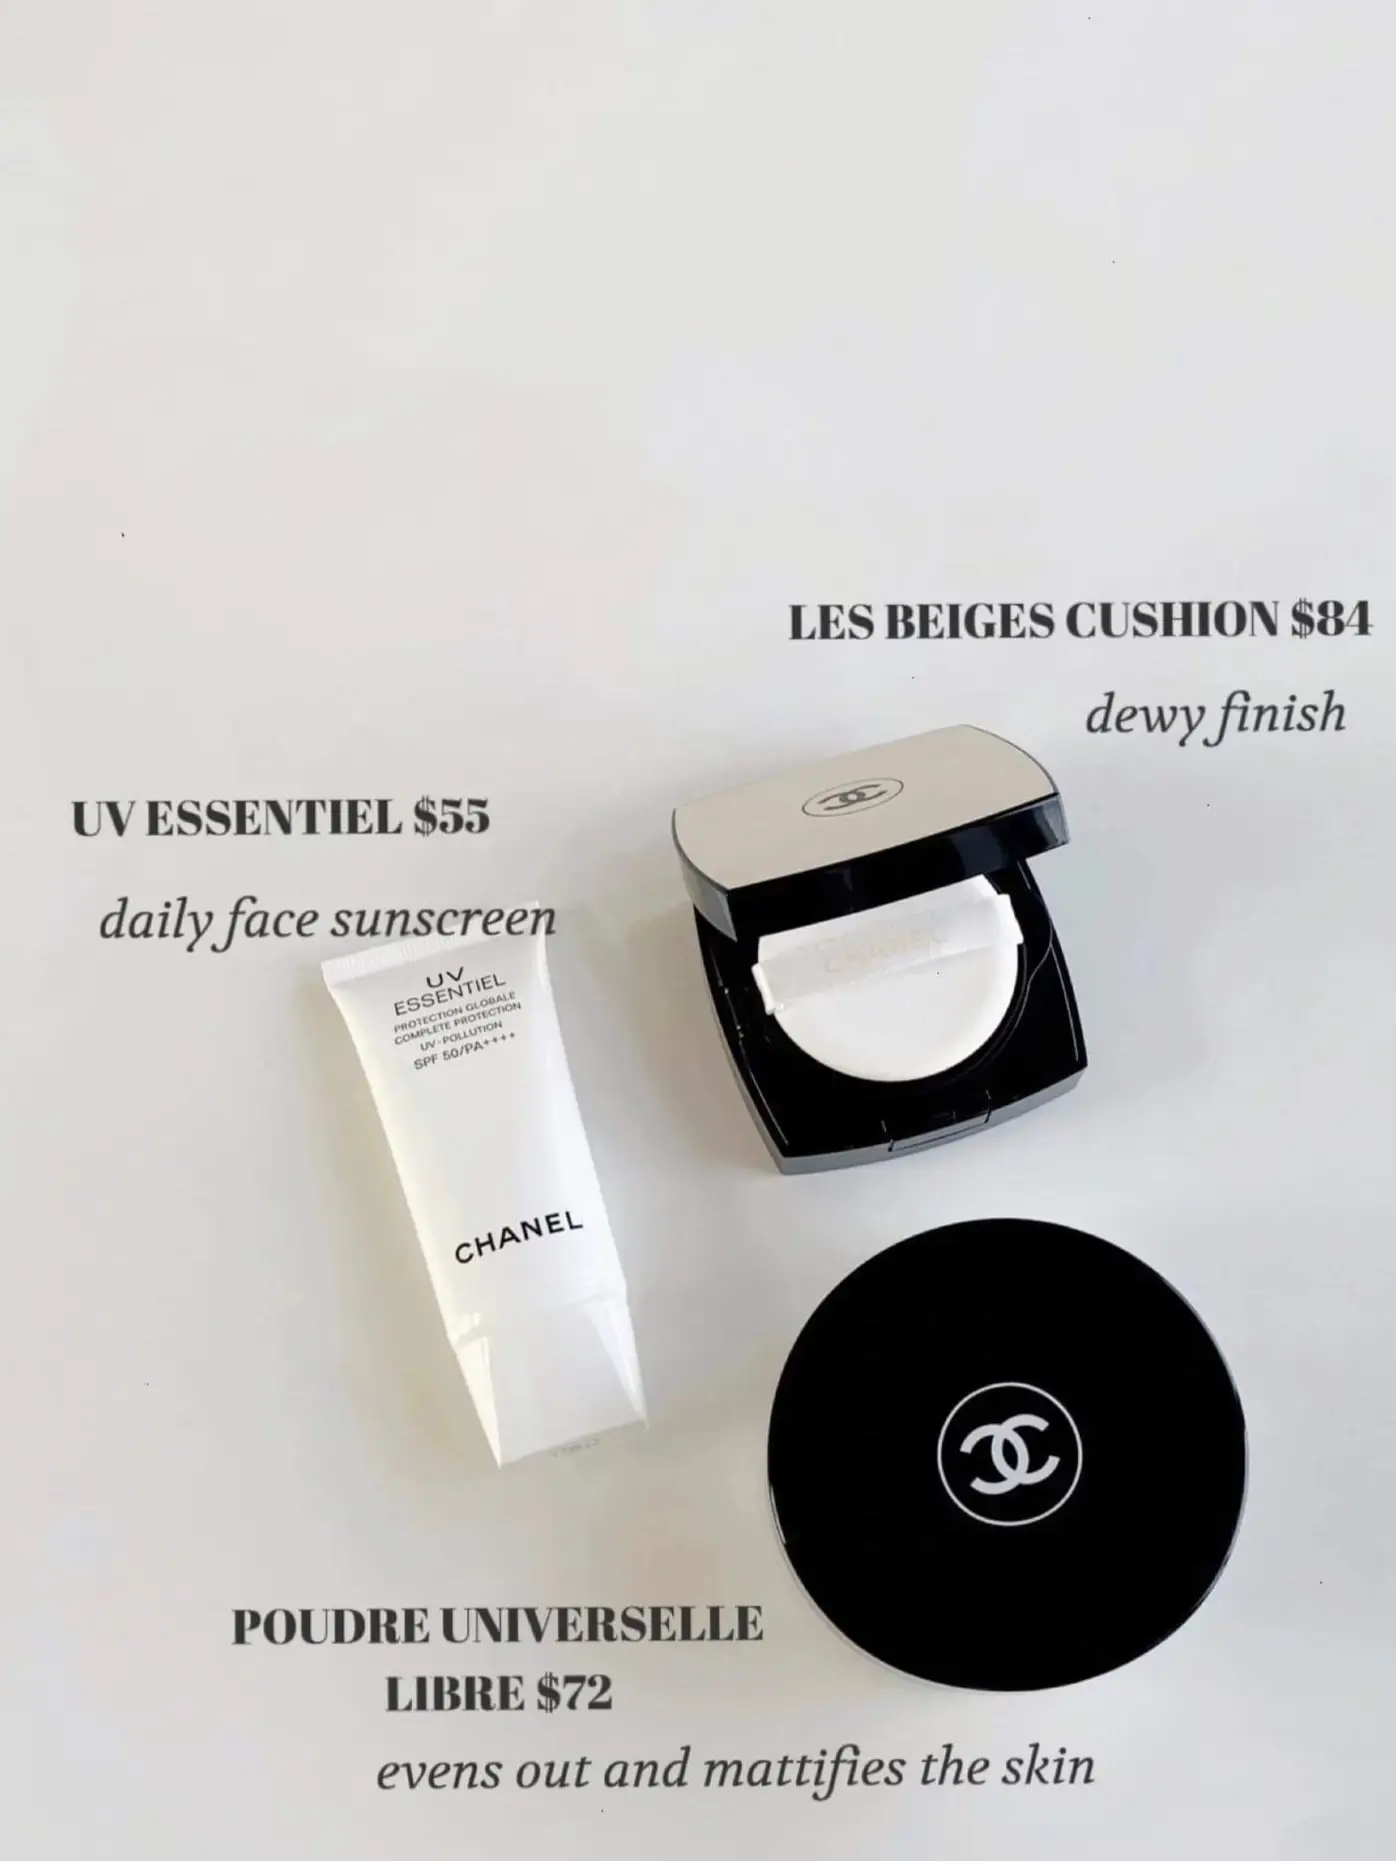 Full Face of Chanel: skincare and makeup